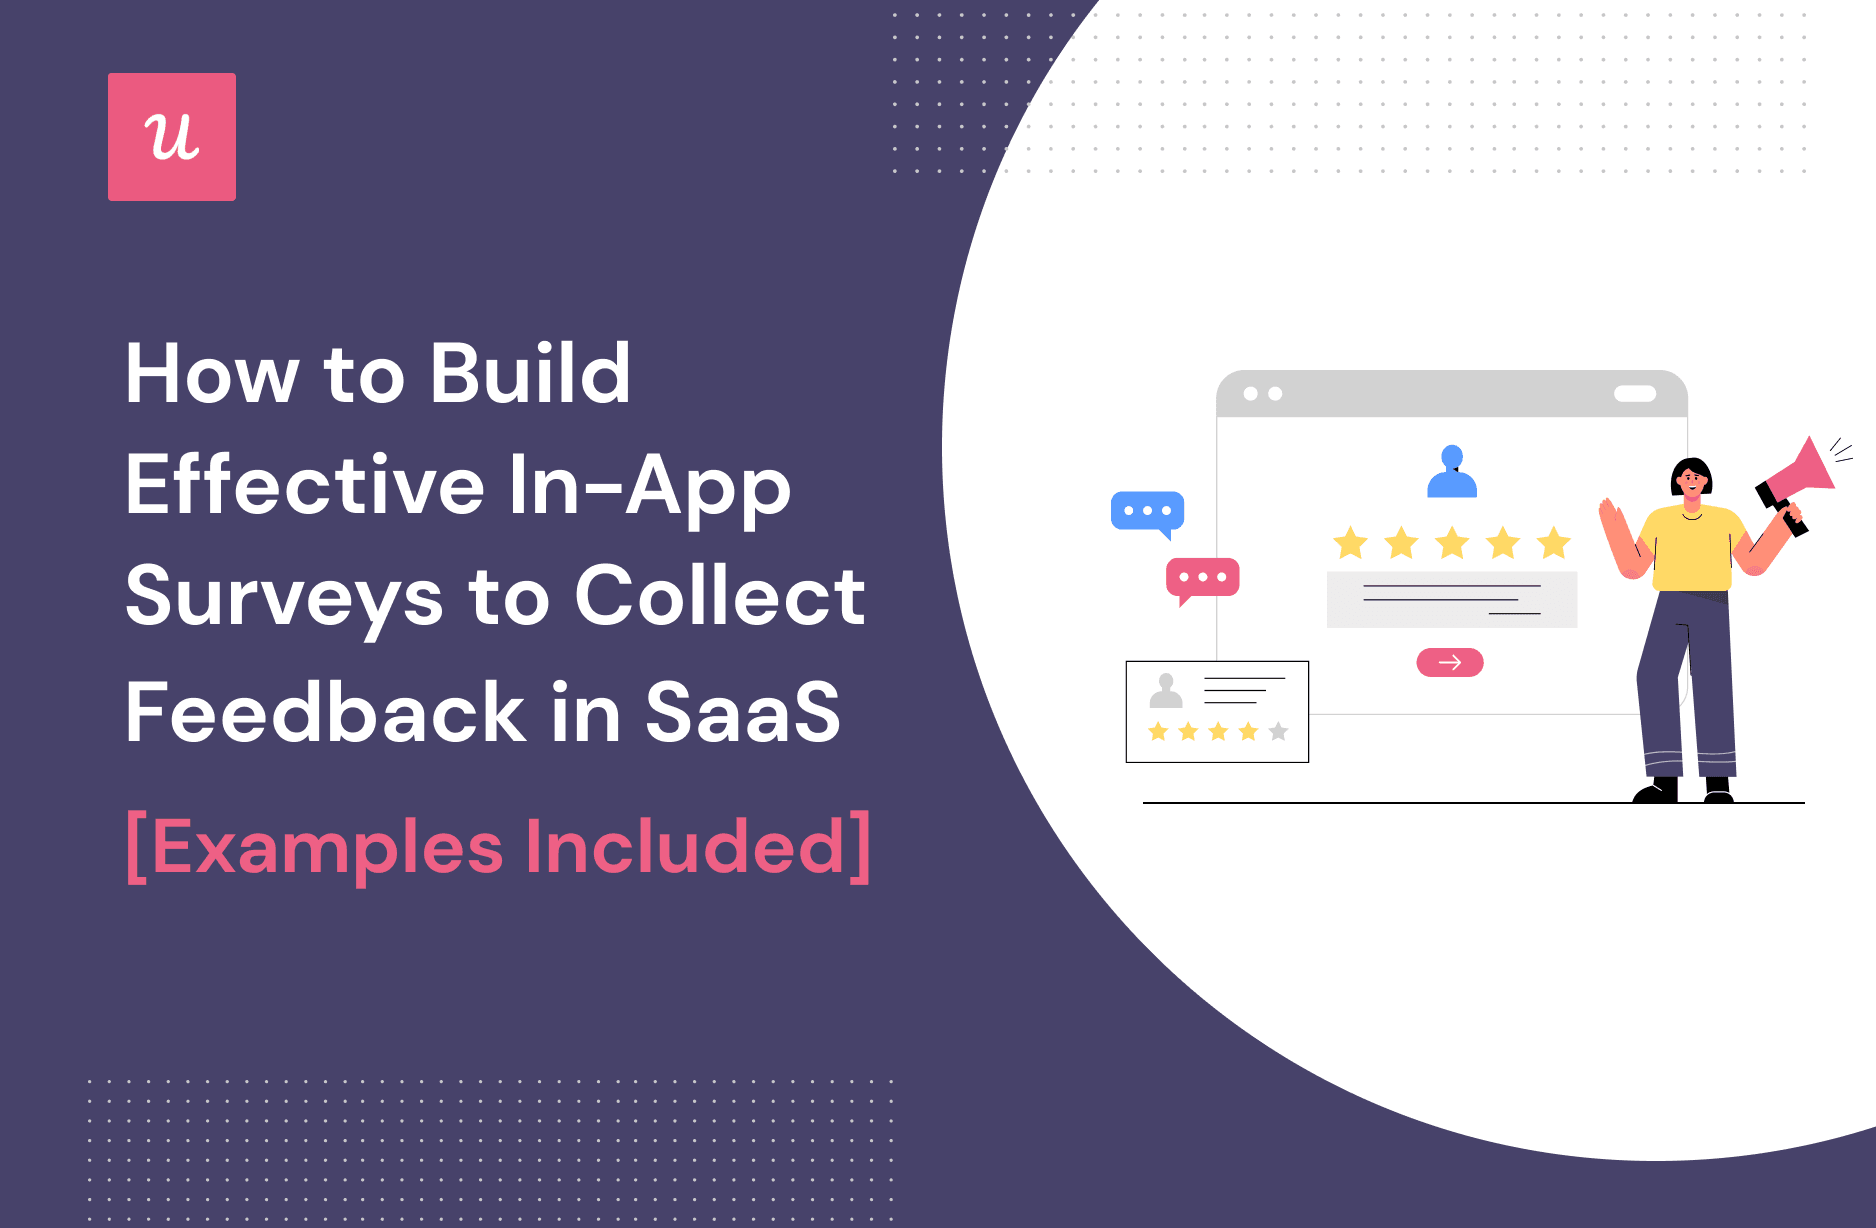 How to build effective in-app surveys to collect feedback in SaaS [Examples included]